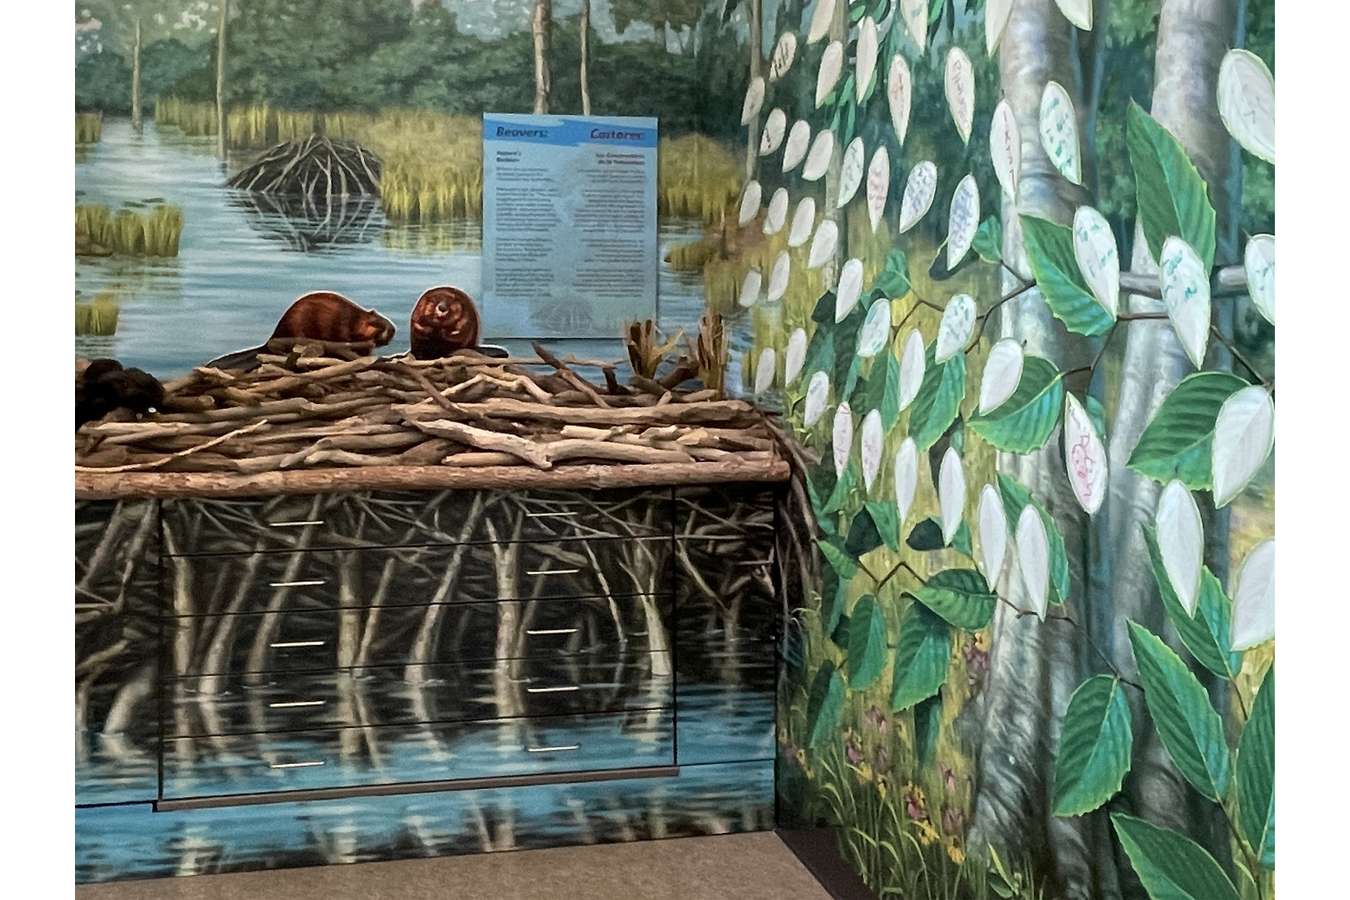 SPVC Beaver Leaves : Beaver Dam uses chewed wood found in the park. Discovery Drawers and side storage are below the branches. Staff questions on tree mural promote bay stewardship  |  "Leaves" are reusable commitment statements